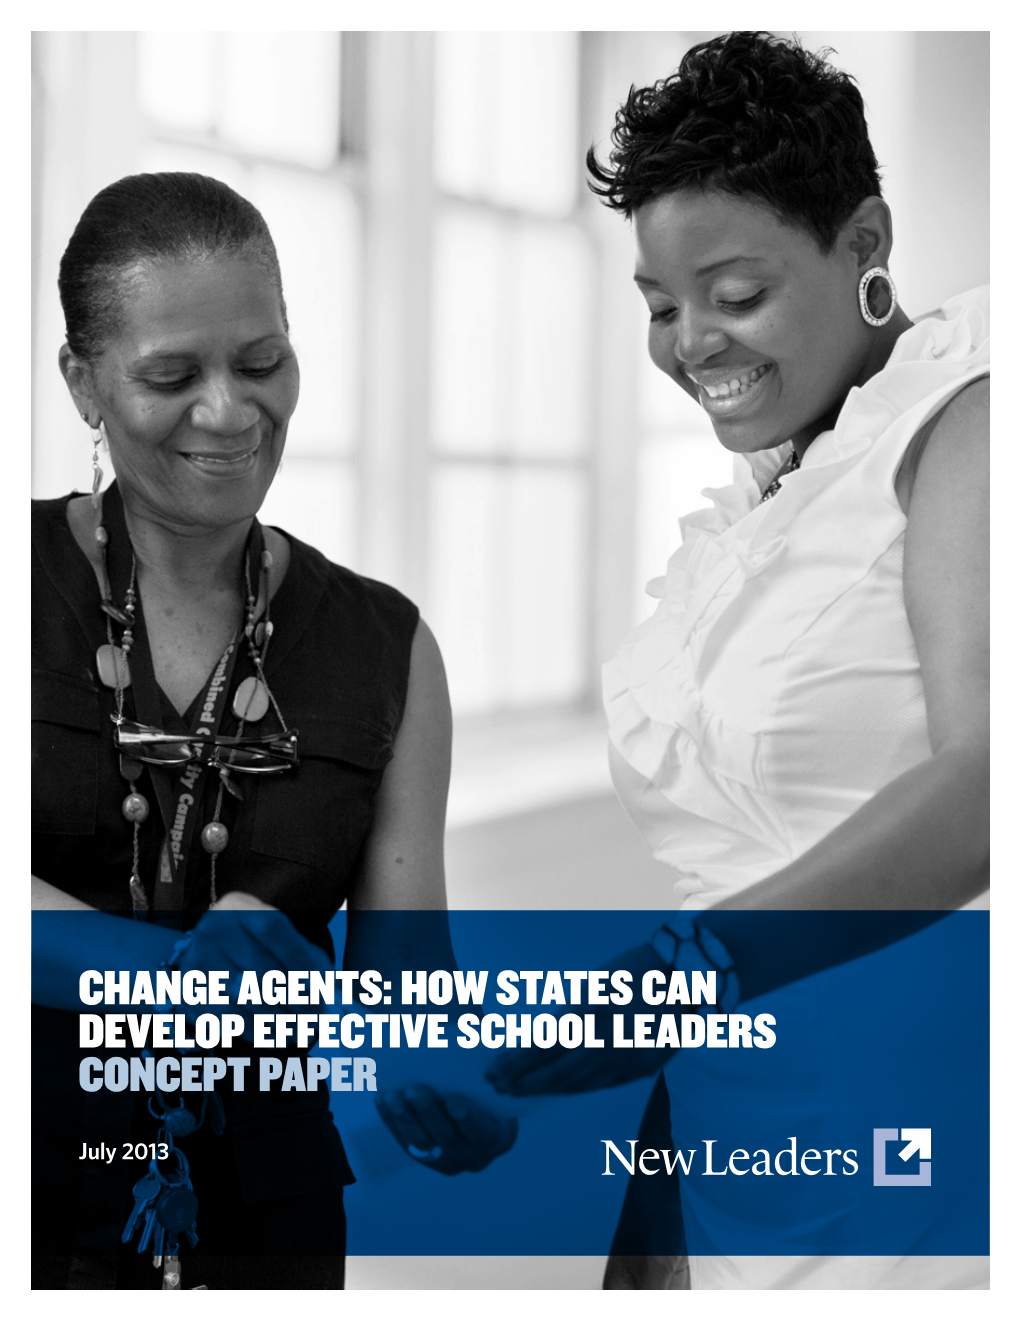 Change Agents: How States Can Develop Effective School Leaders Concept Paper